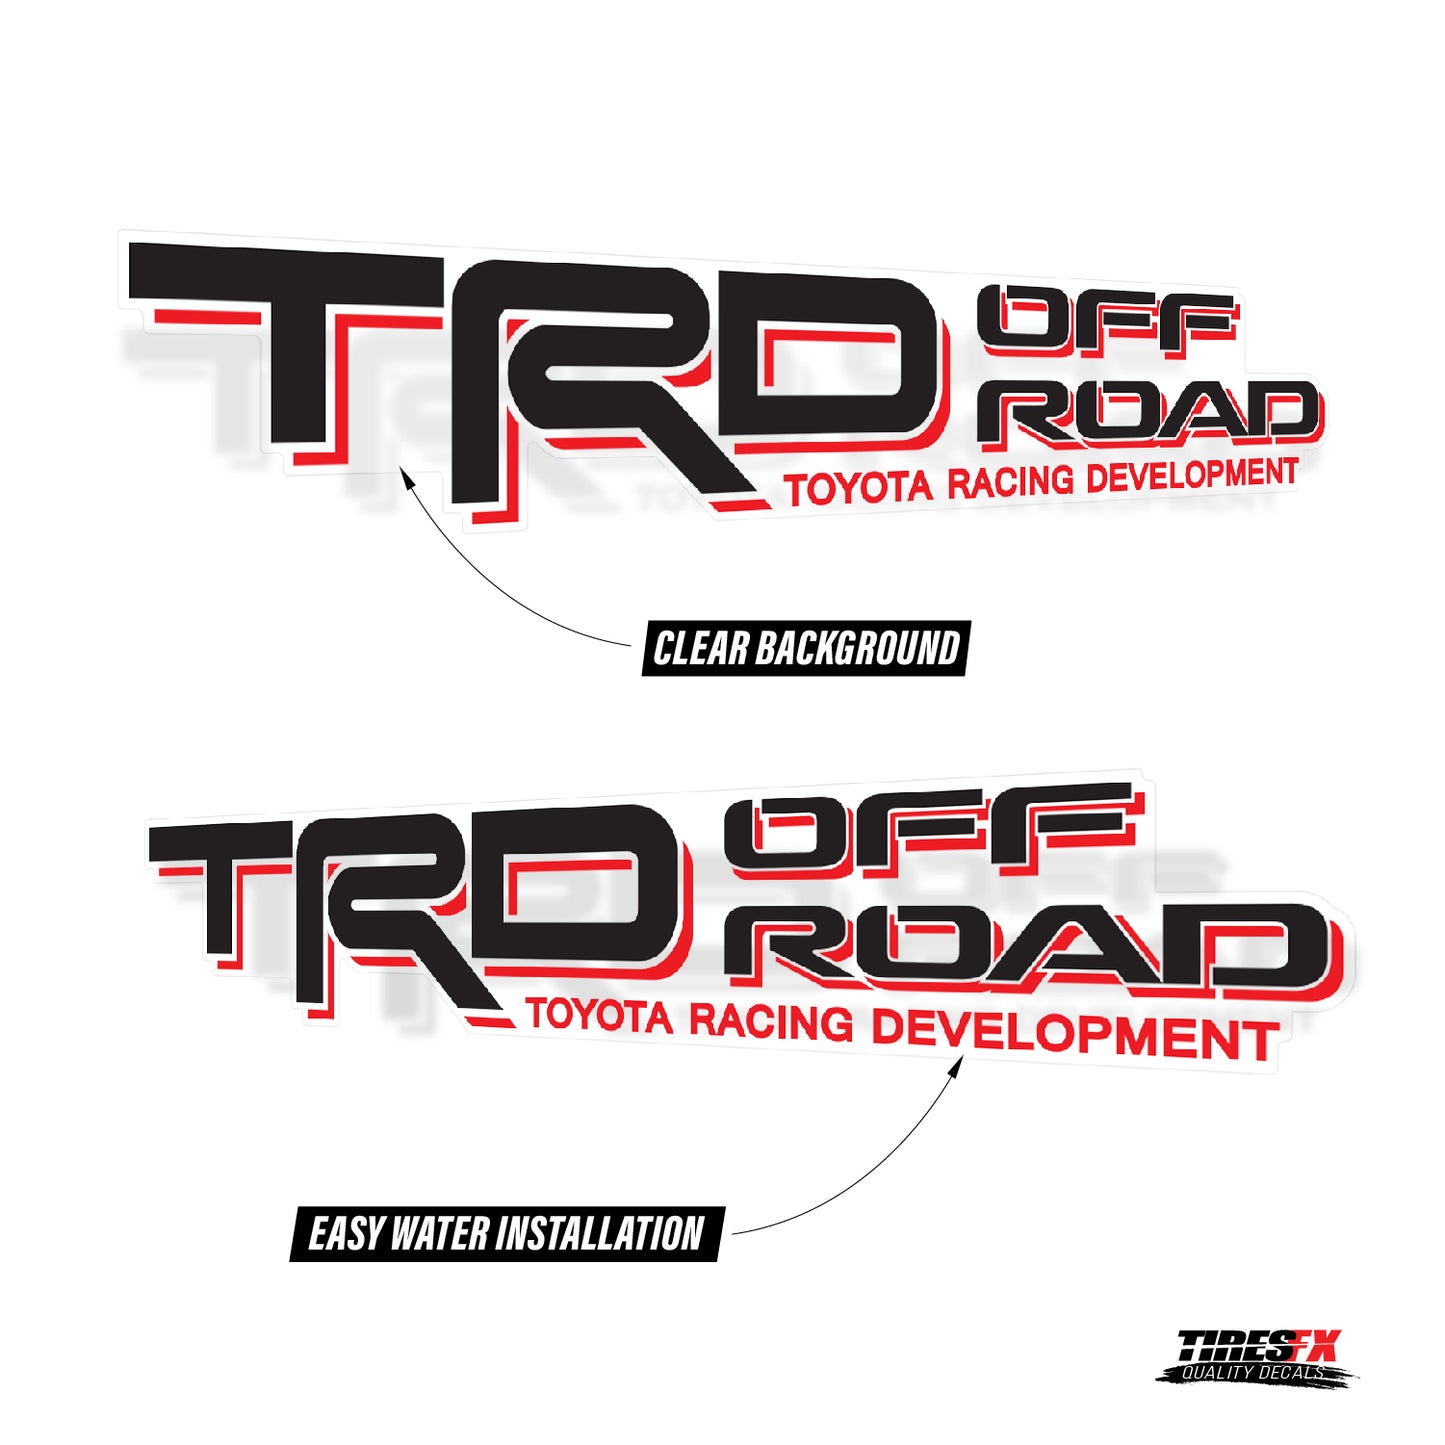 TRD Offroad Decals for Tacoma Bed, 4x4 Racing Development Sticker | Set of 2 Black-Red - TiresFX